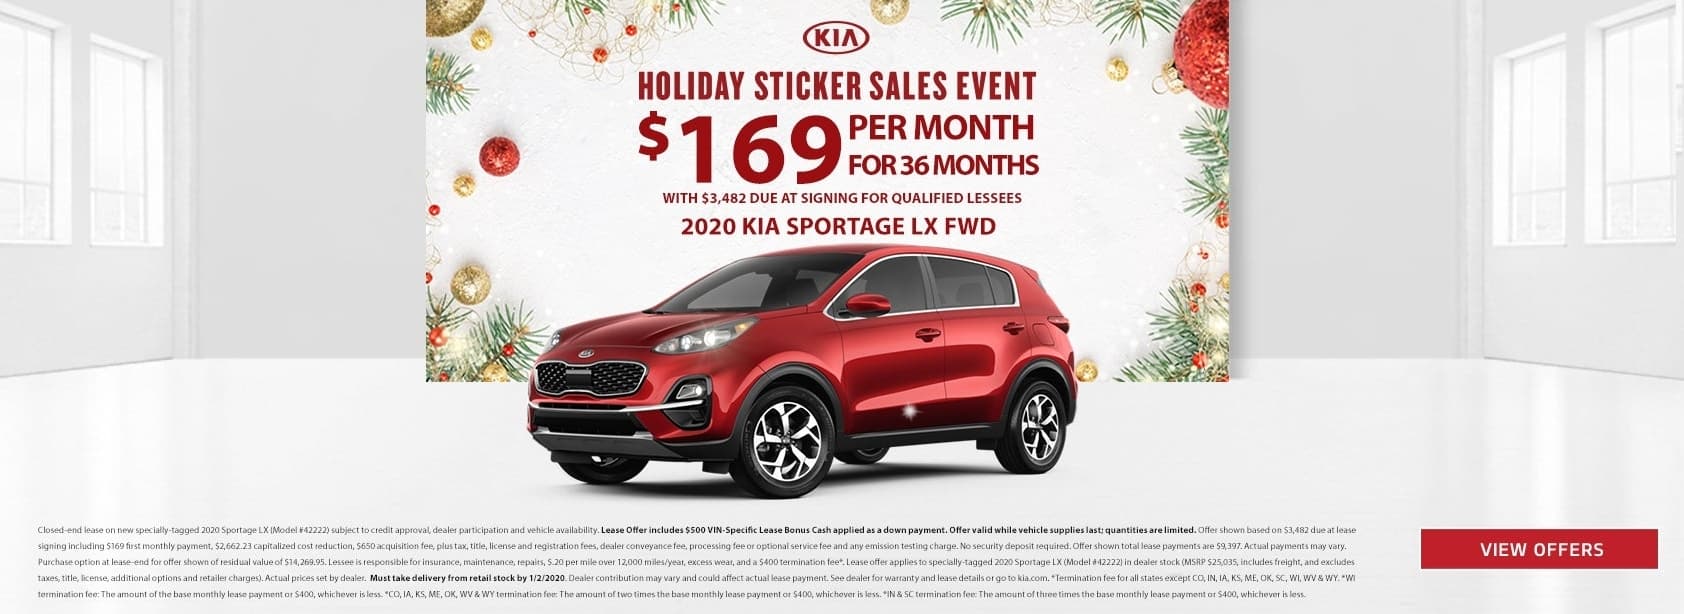 Save Big at the 2019 Kia Holiday Sticker Sales Event near Youngstown OH